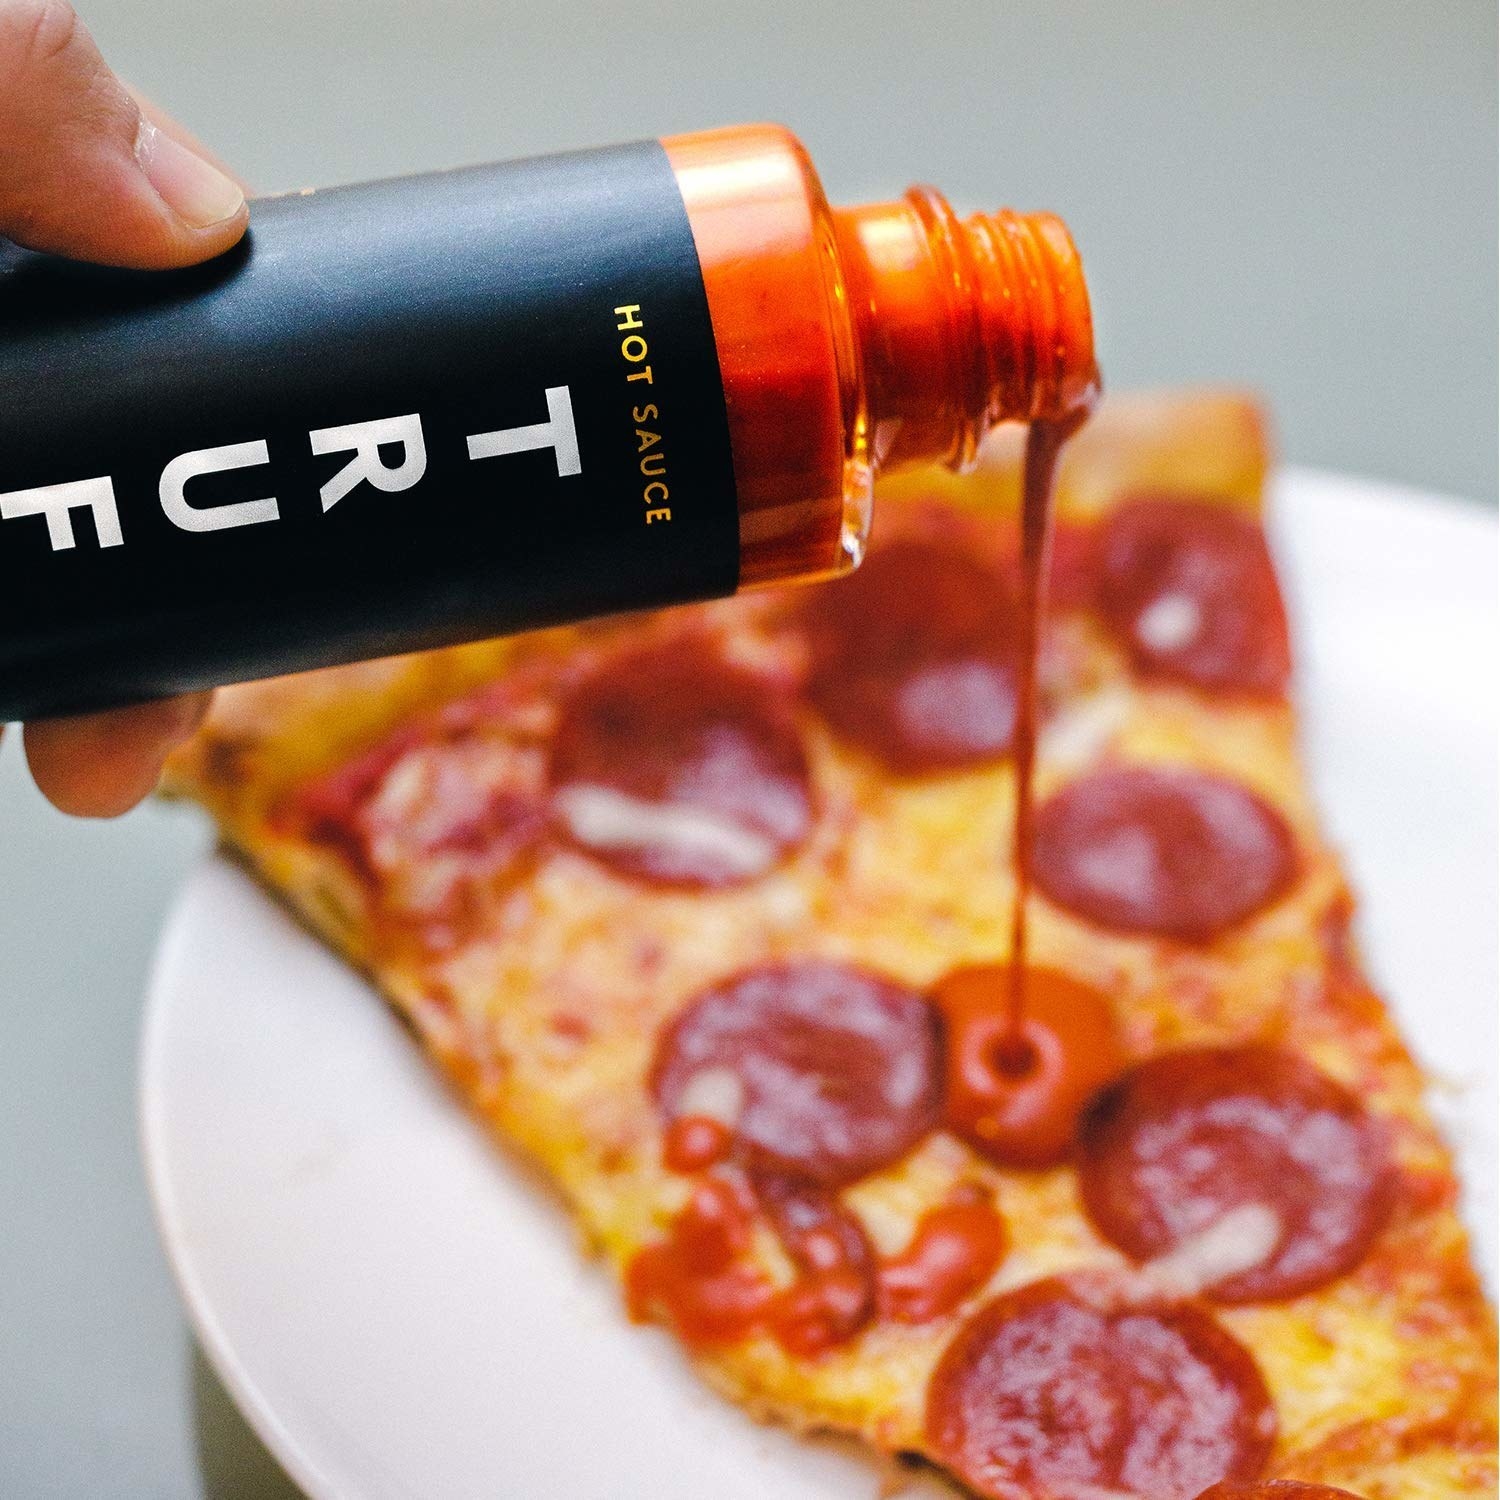 truffle hot sauce being poured on pizza